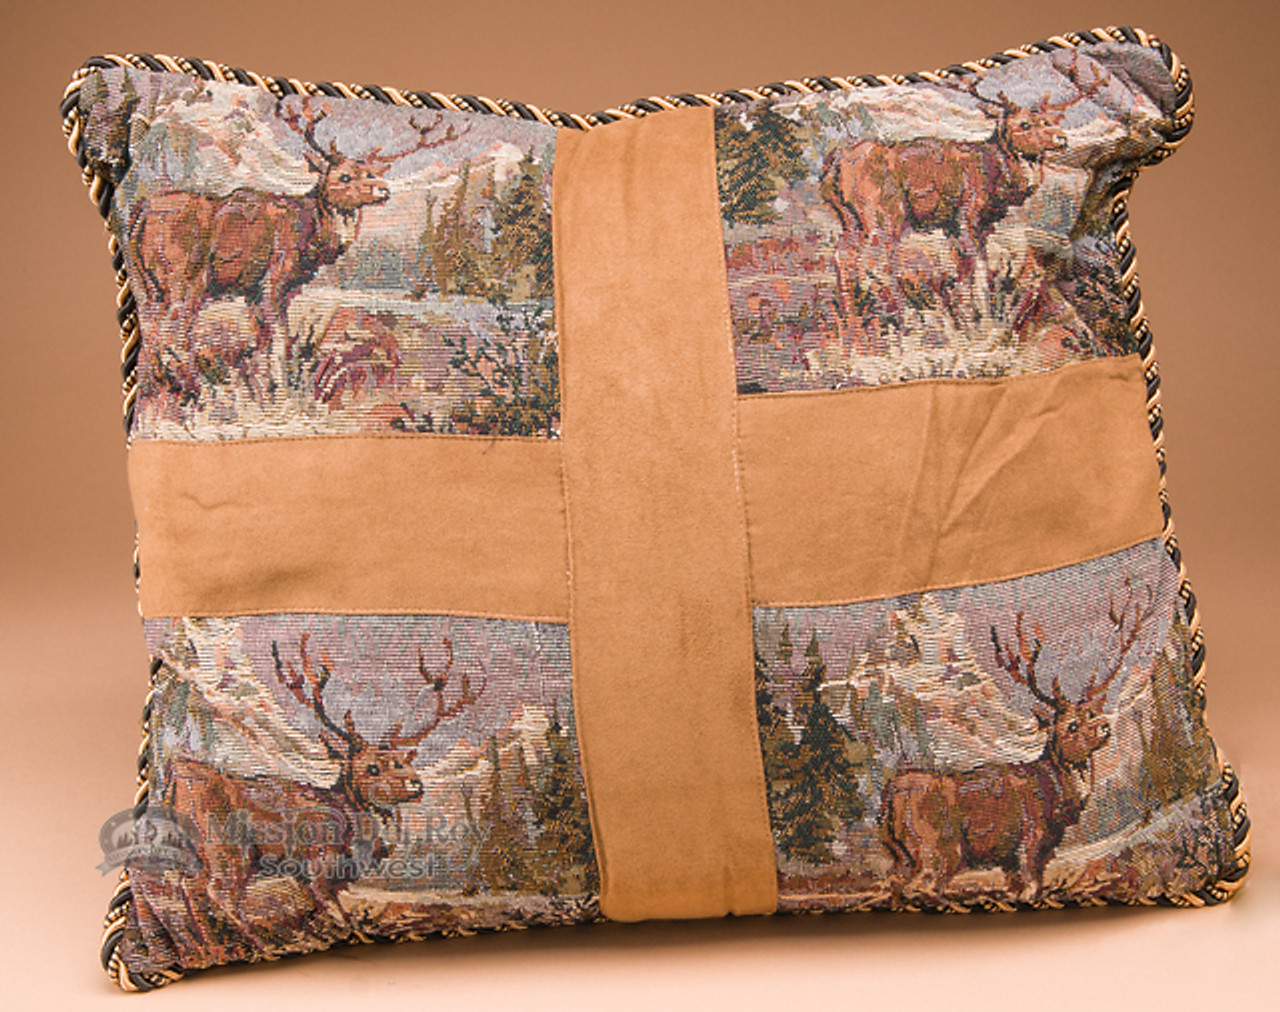 https://cdn11.bigcommerce.com/s-3y1hjx24/images/stencil/1280x1280/products/20943/20965/classic-western-tapestry-pillow-16x18-elk-p50-9__44679.1481672820.jpg?c=2